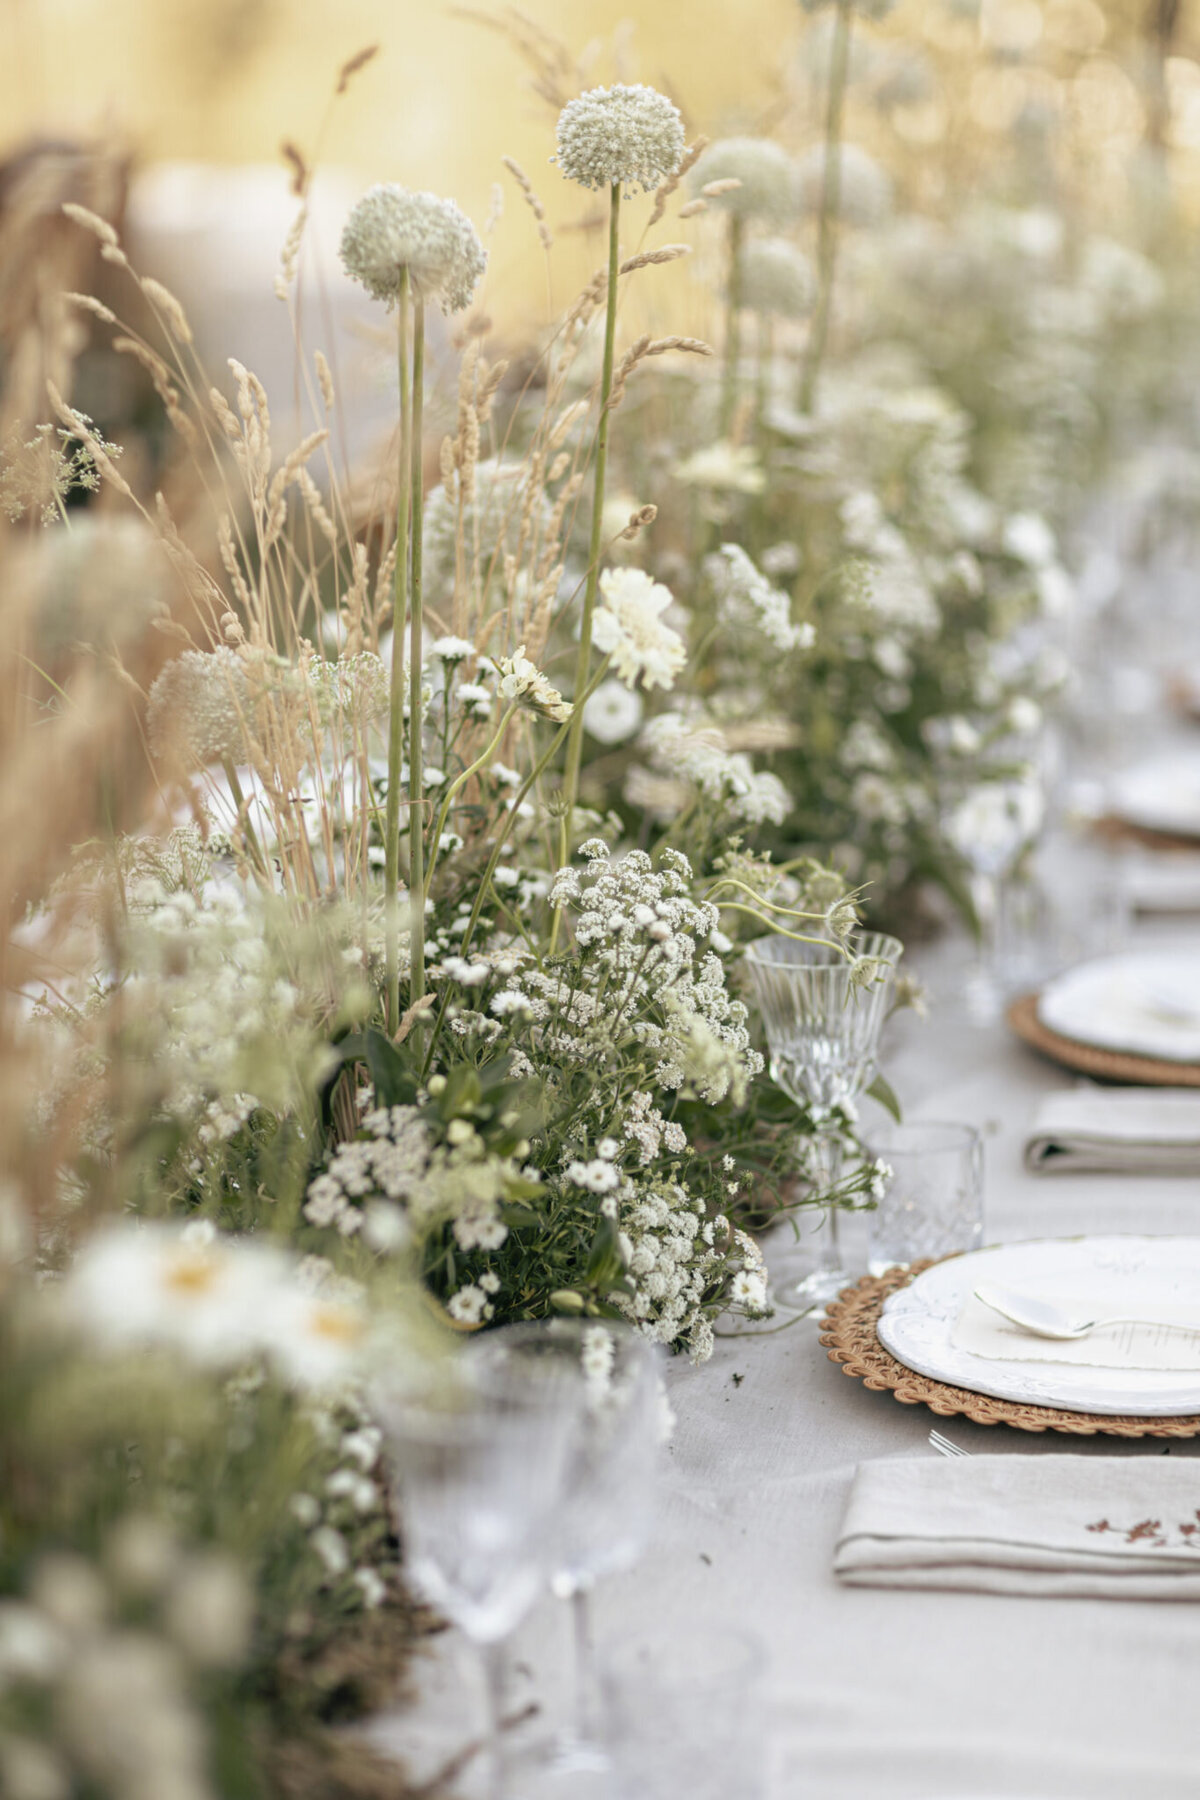 An elegant mise en place with wild vibes